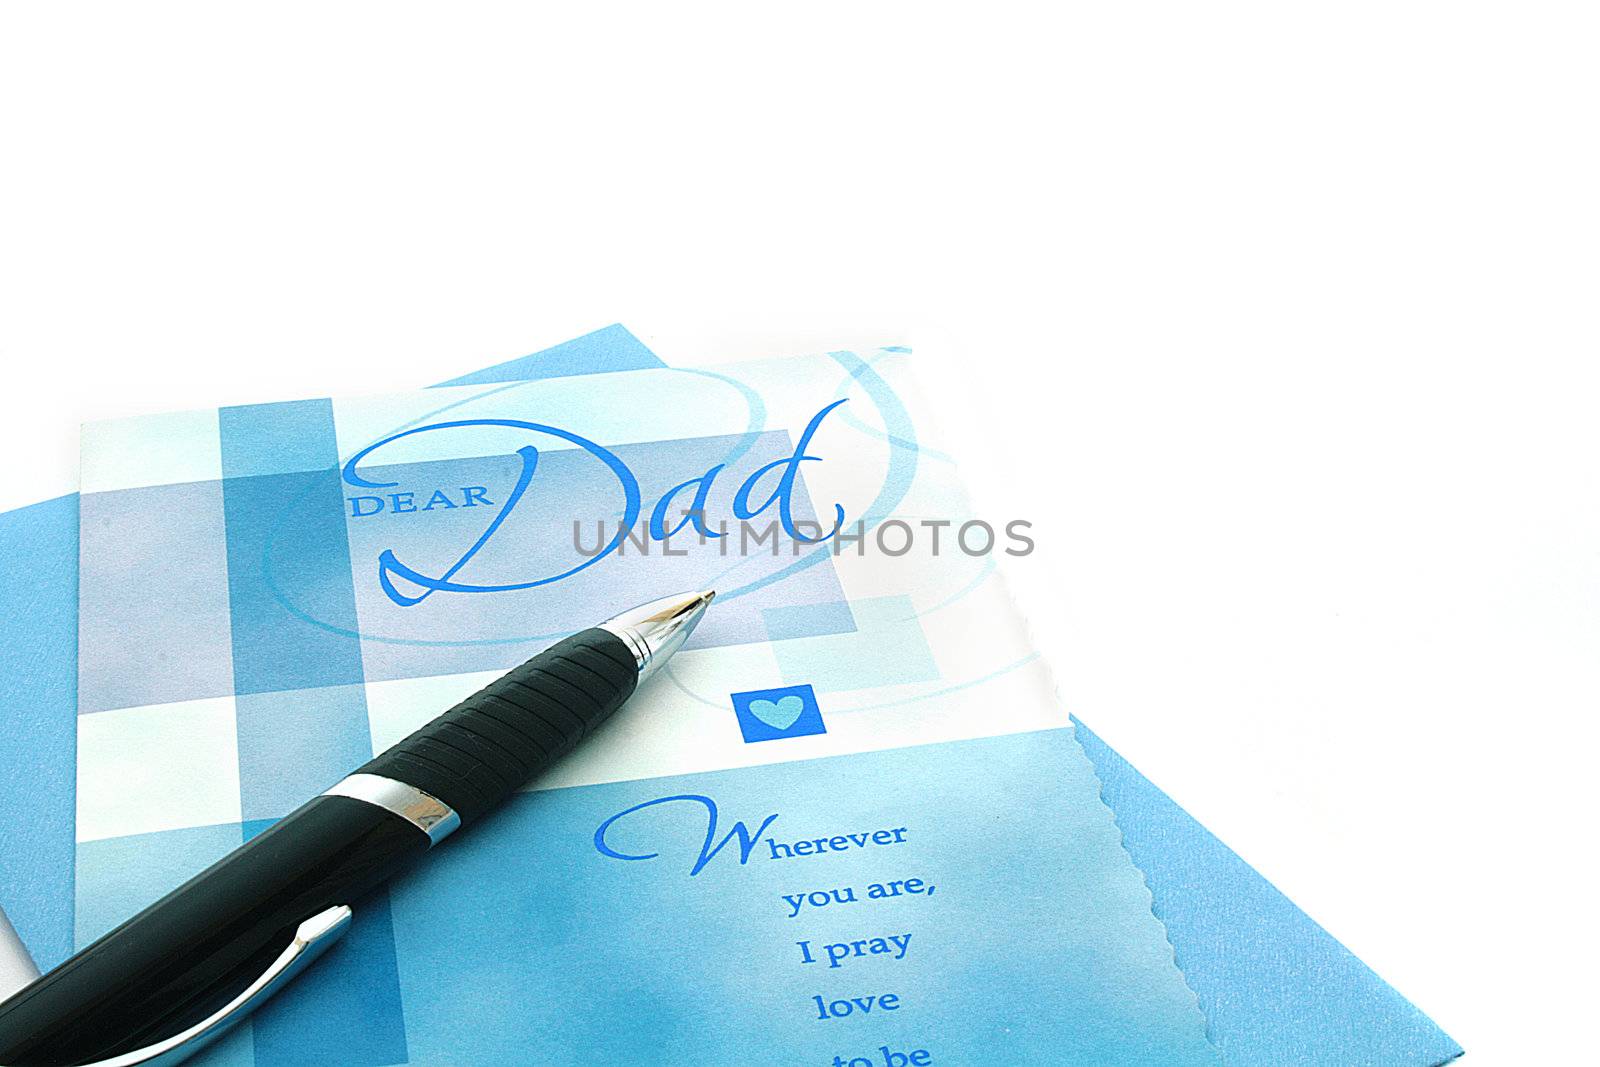 The black pen against congratulatory cards to Father day.